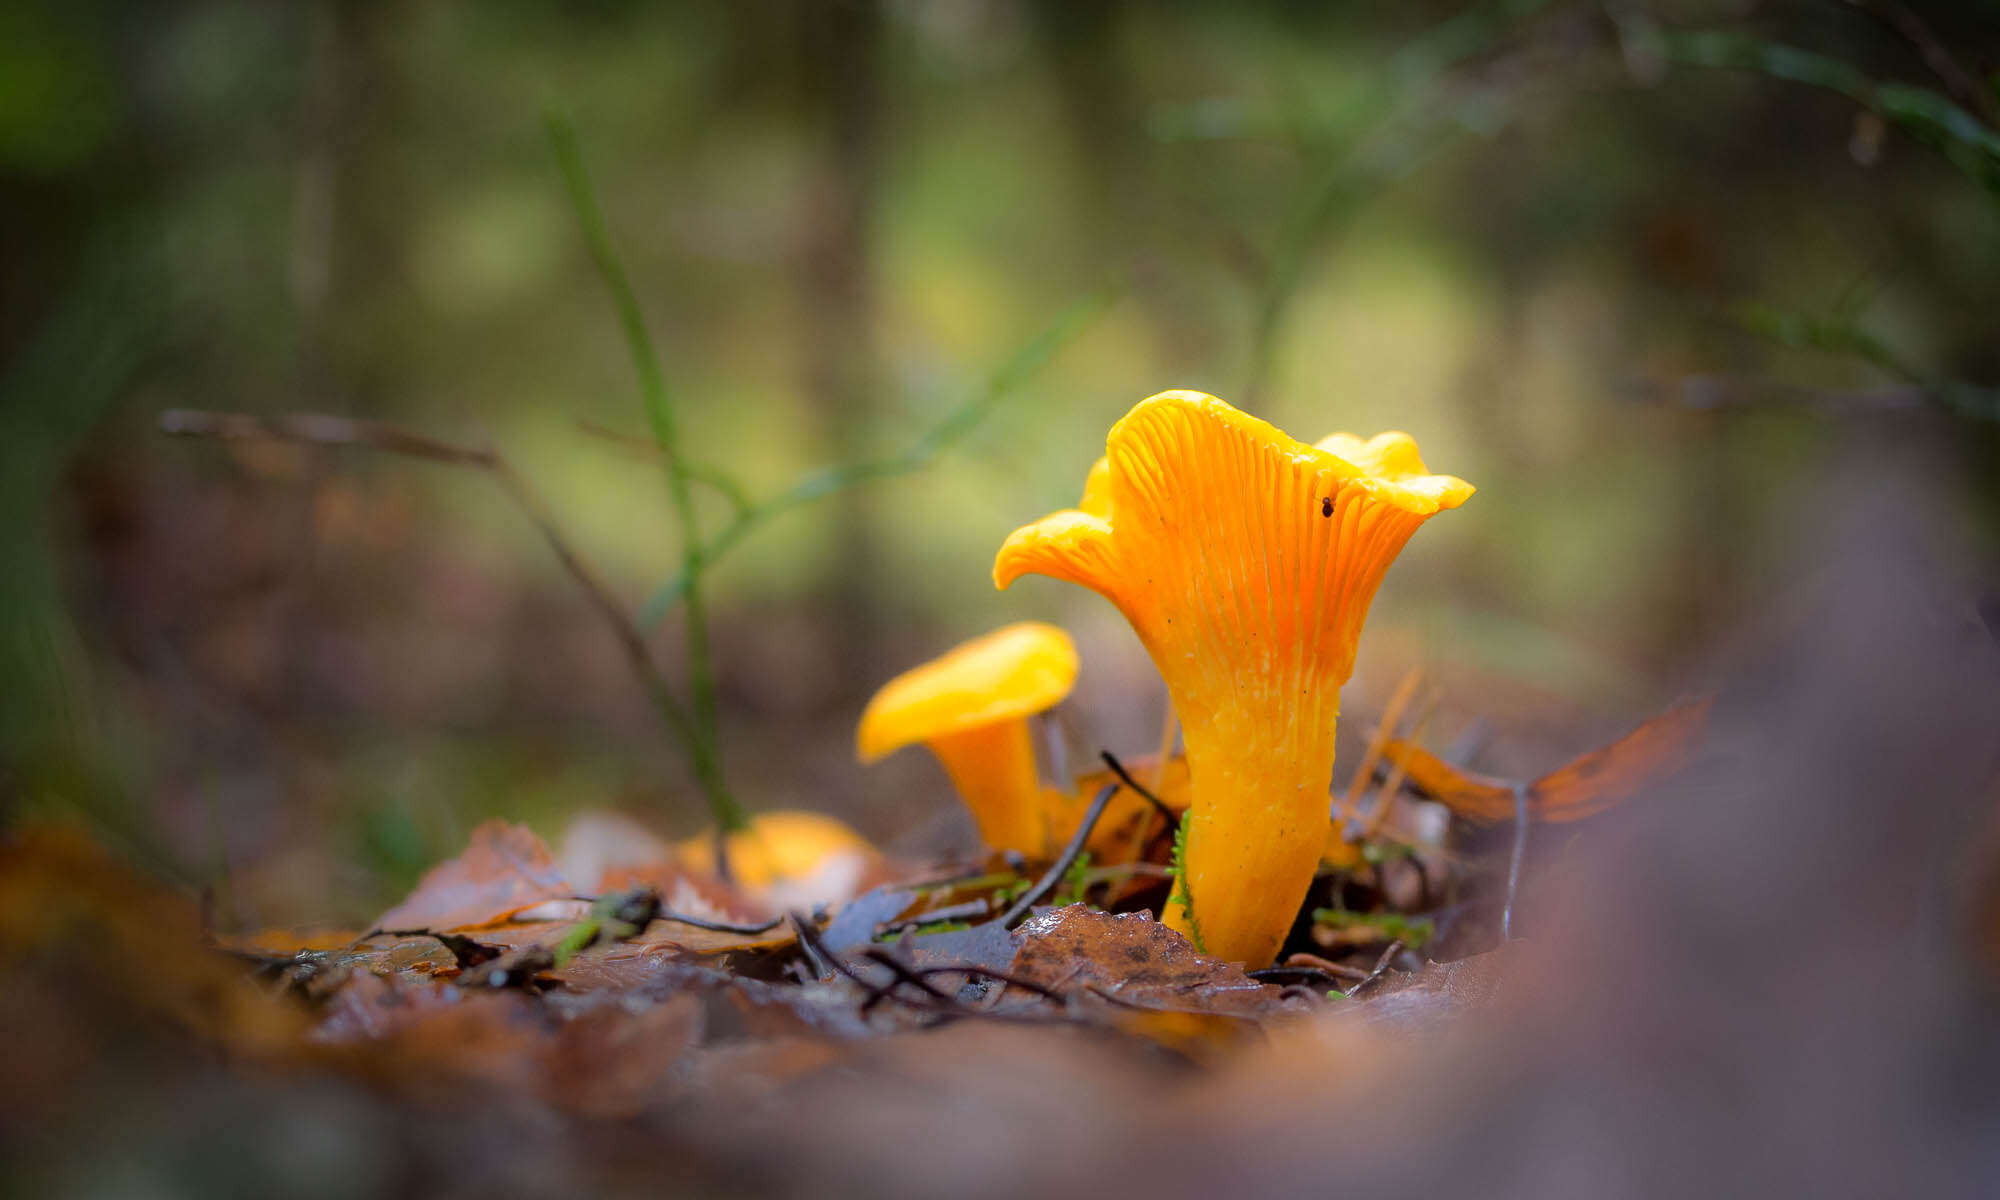 Nuuksio National Park in fall. Chanterelle, summer delicacies, popping up late in the fall. Nature near Helsinki, Finland.